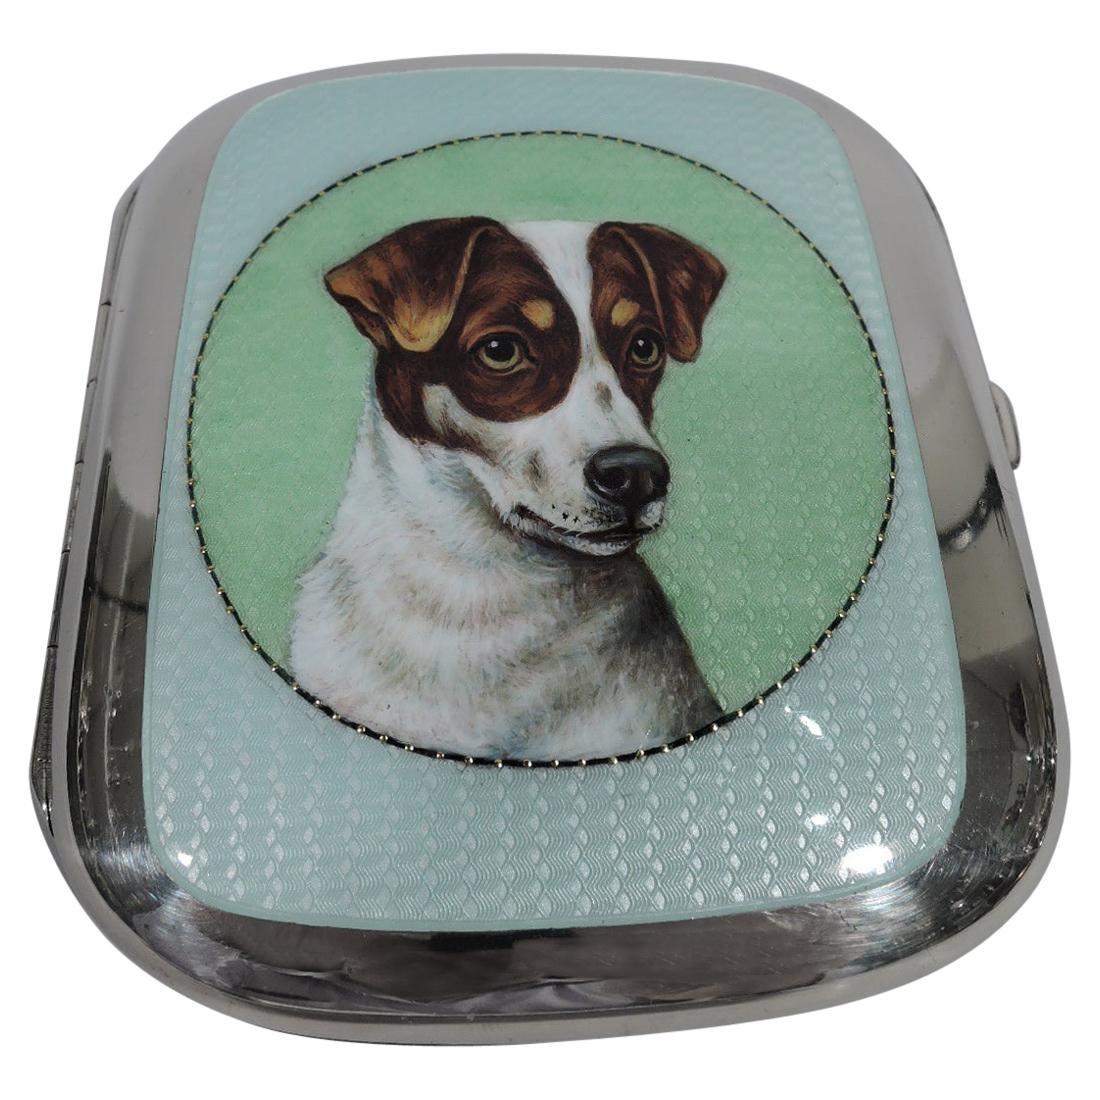 European Silver and Enameled Dog Case with Jack Russell Pup Portrait